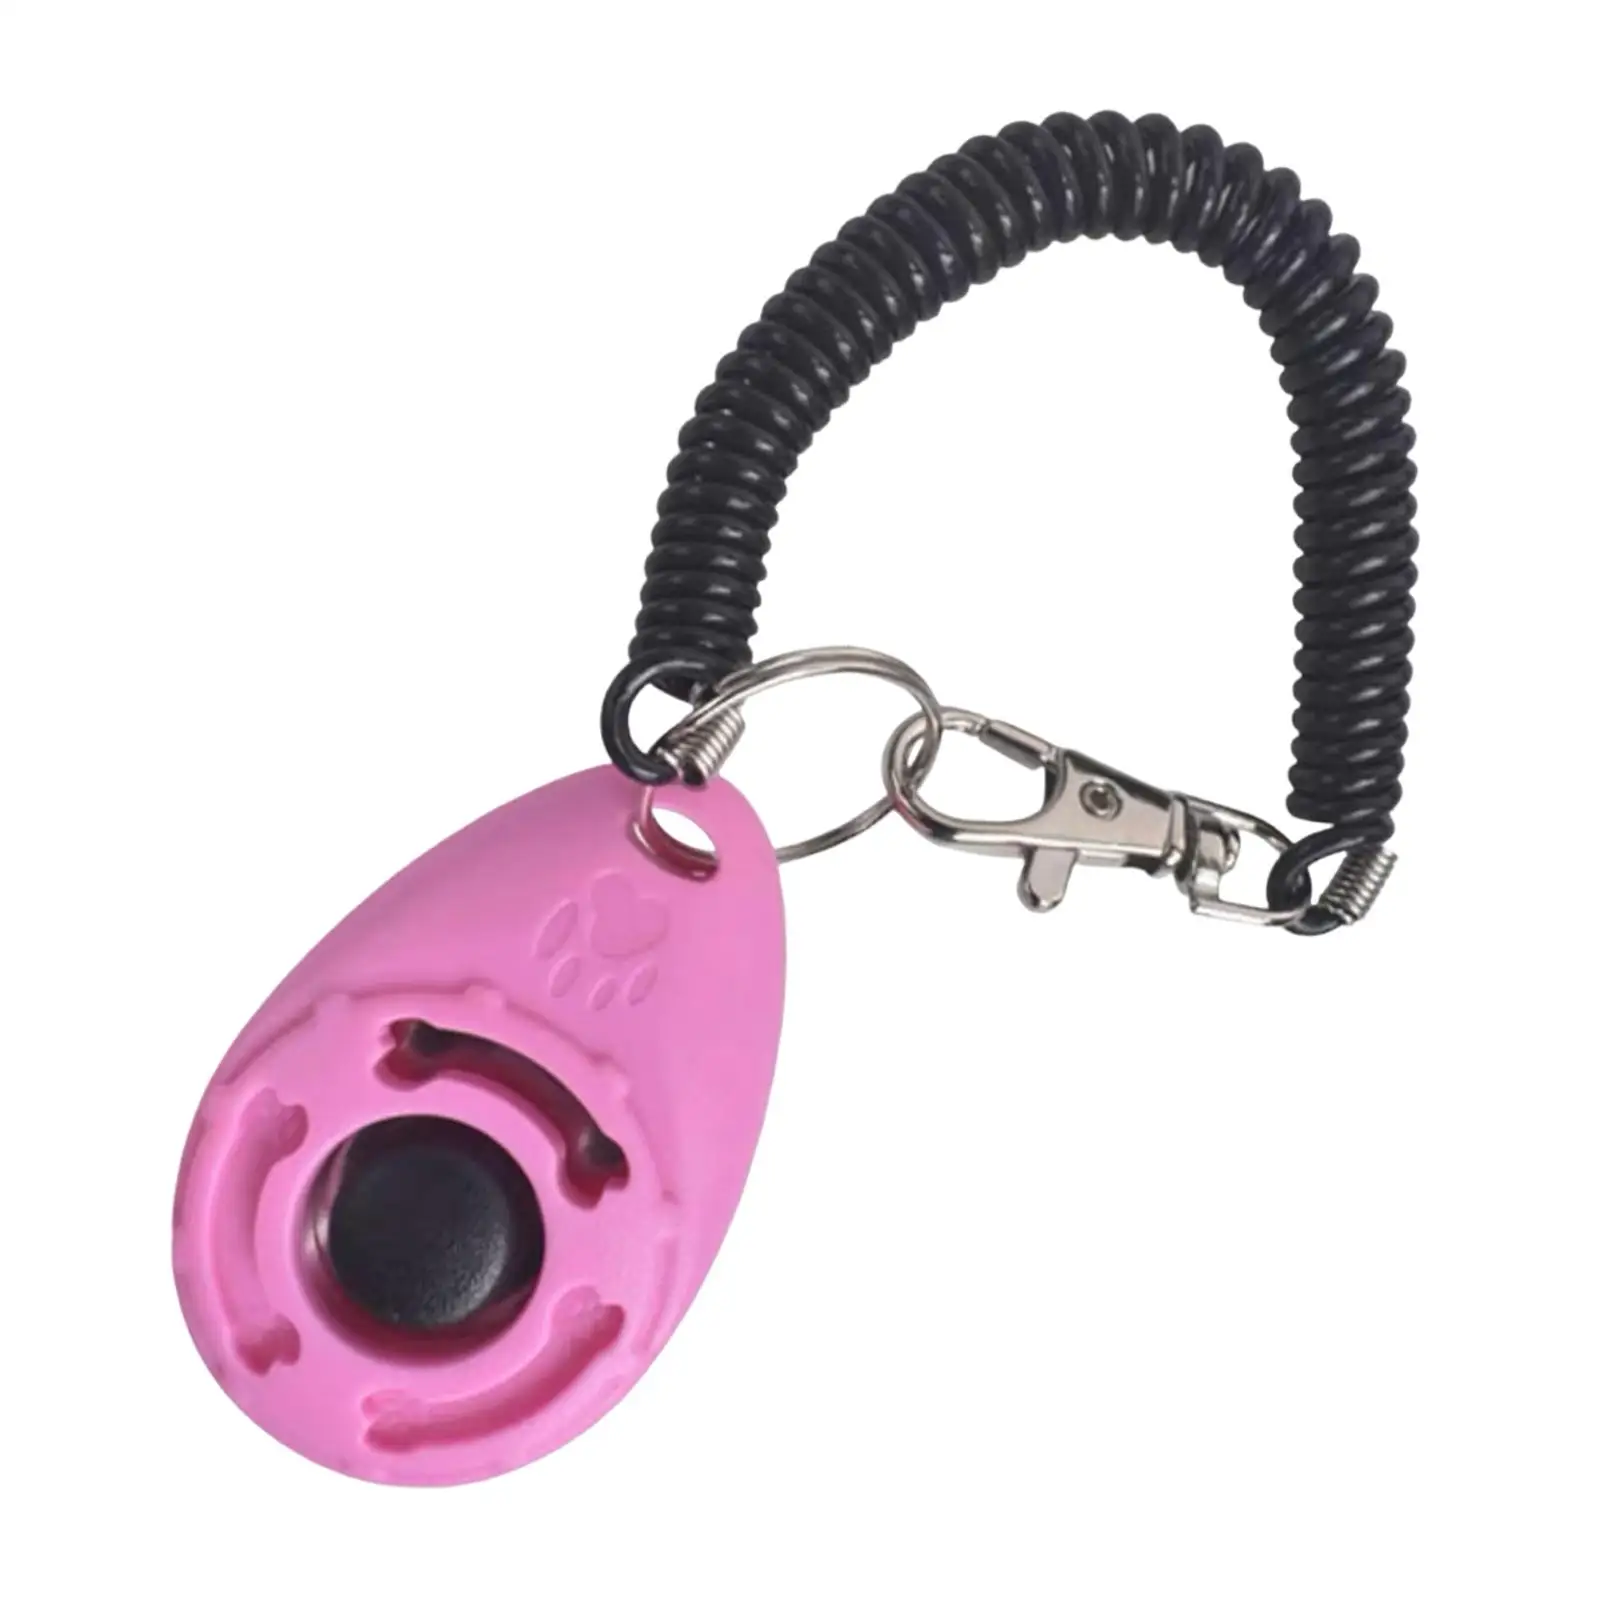 Dog Training Click with Wrist Strap Easy to Use for Household Pet Supplies